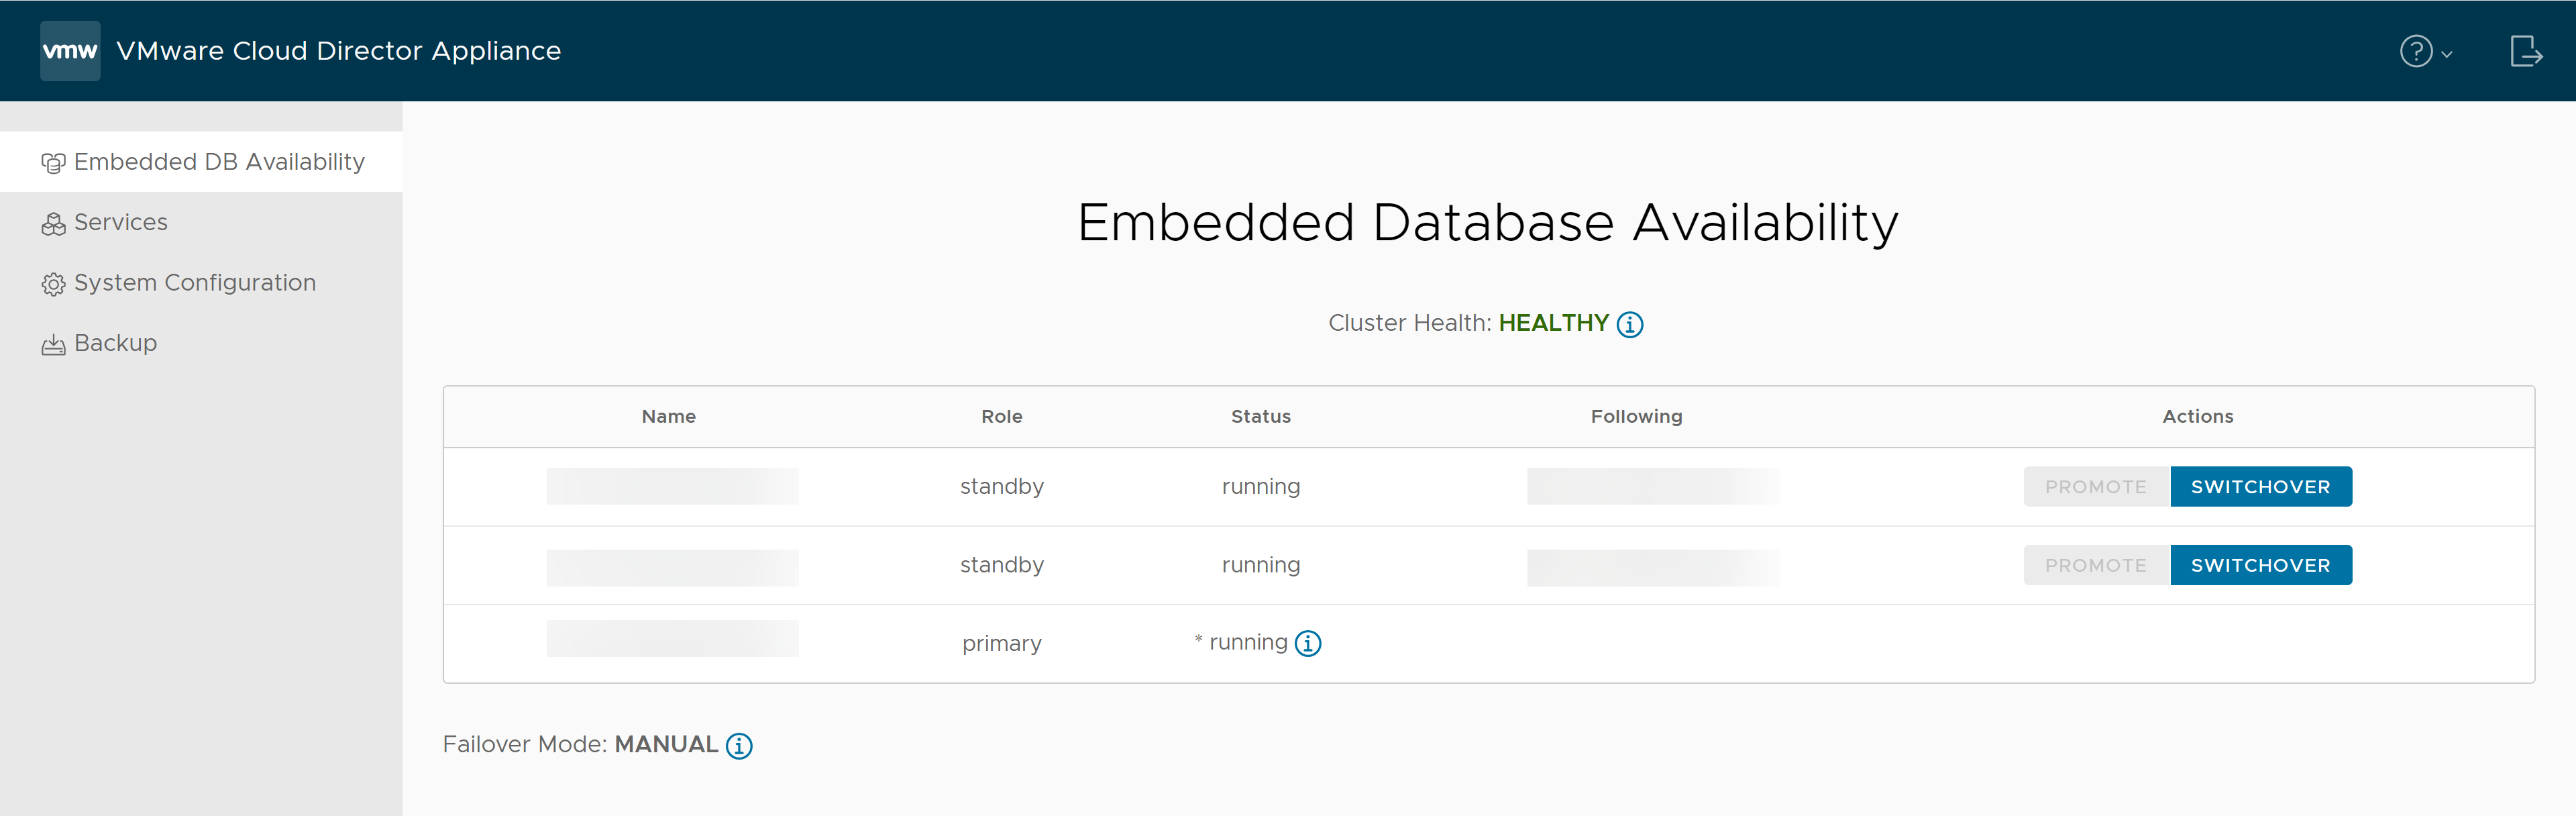 The Embedded Database Availability tab of the VMware Cloud Director appliance management UI shows the cluster health and failover mode of the appliance.